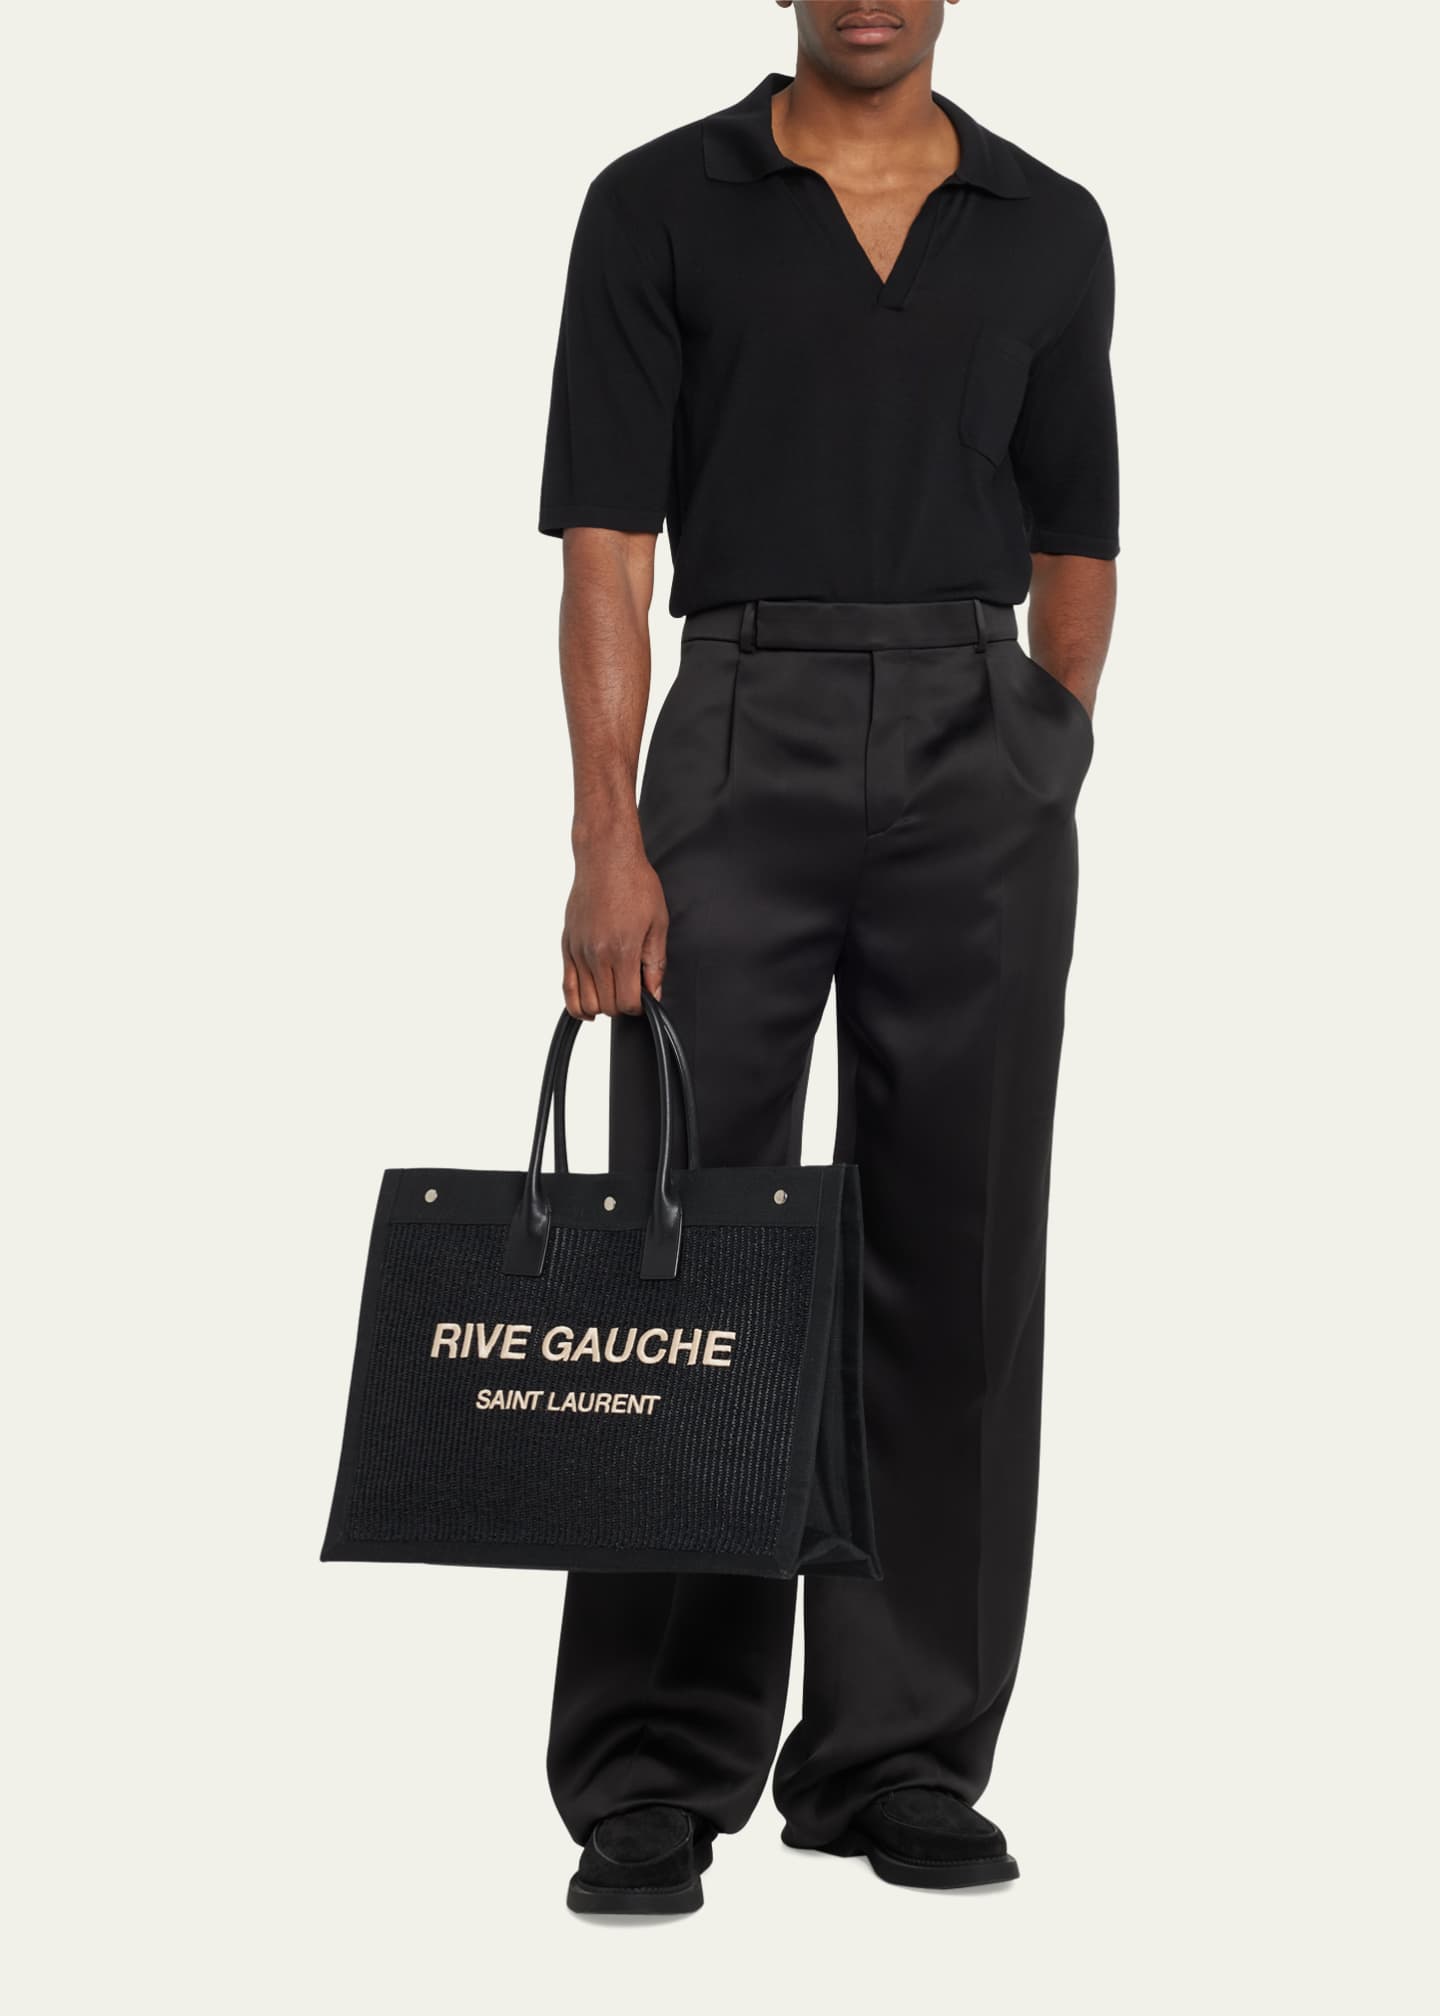 Shop Saint Laurent 2023 SS RIVE GAUCHE TOTE BAG IN CANVAS AND